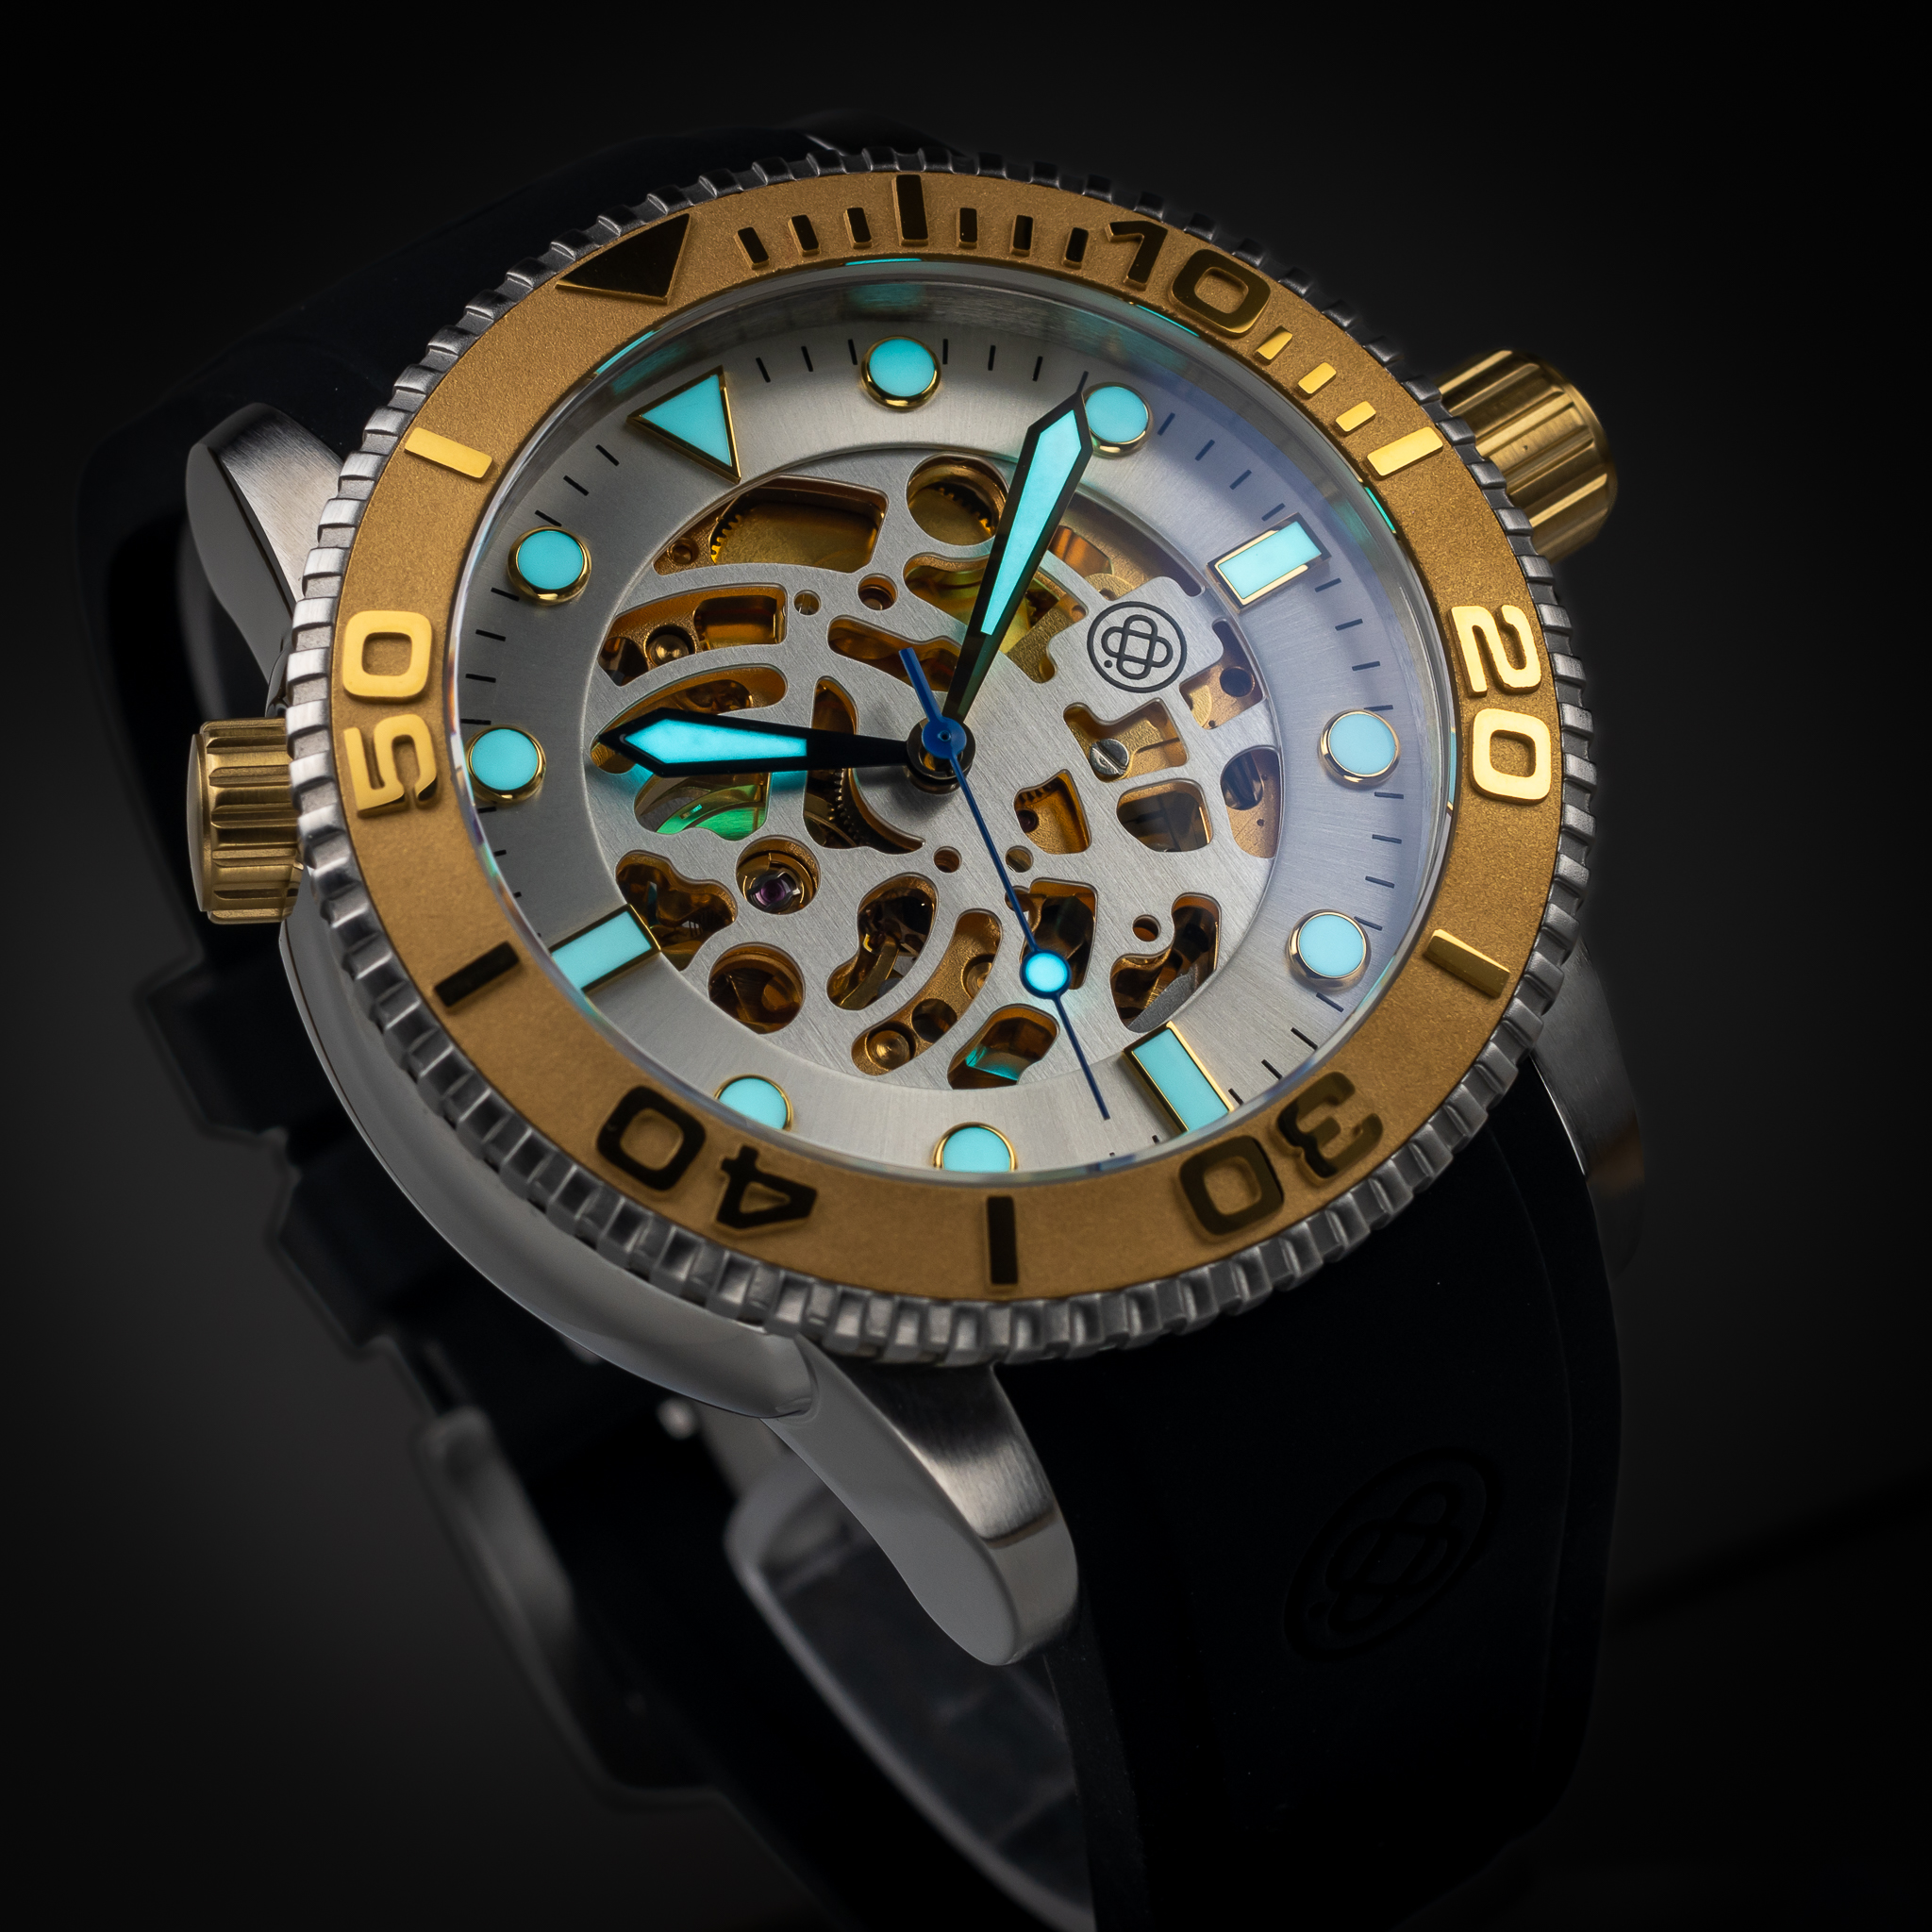 OceanicTime: DEEP BLUE Mechanical SKELETON Divers [find your inner glow]